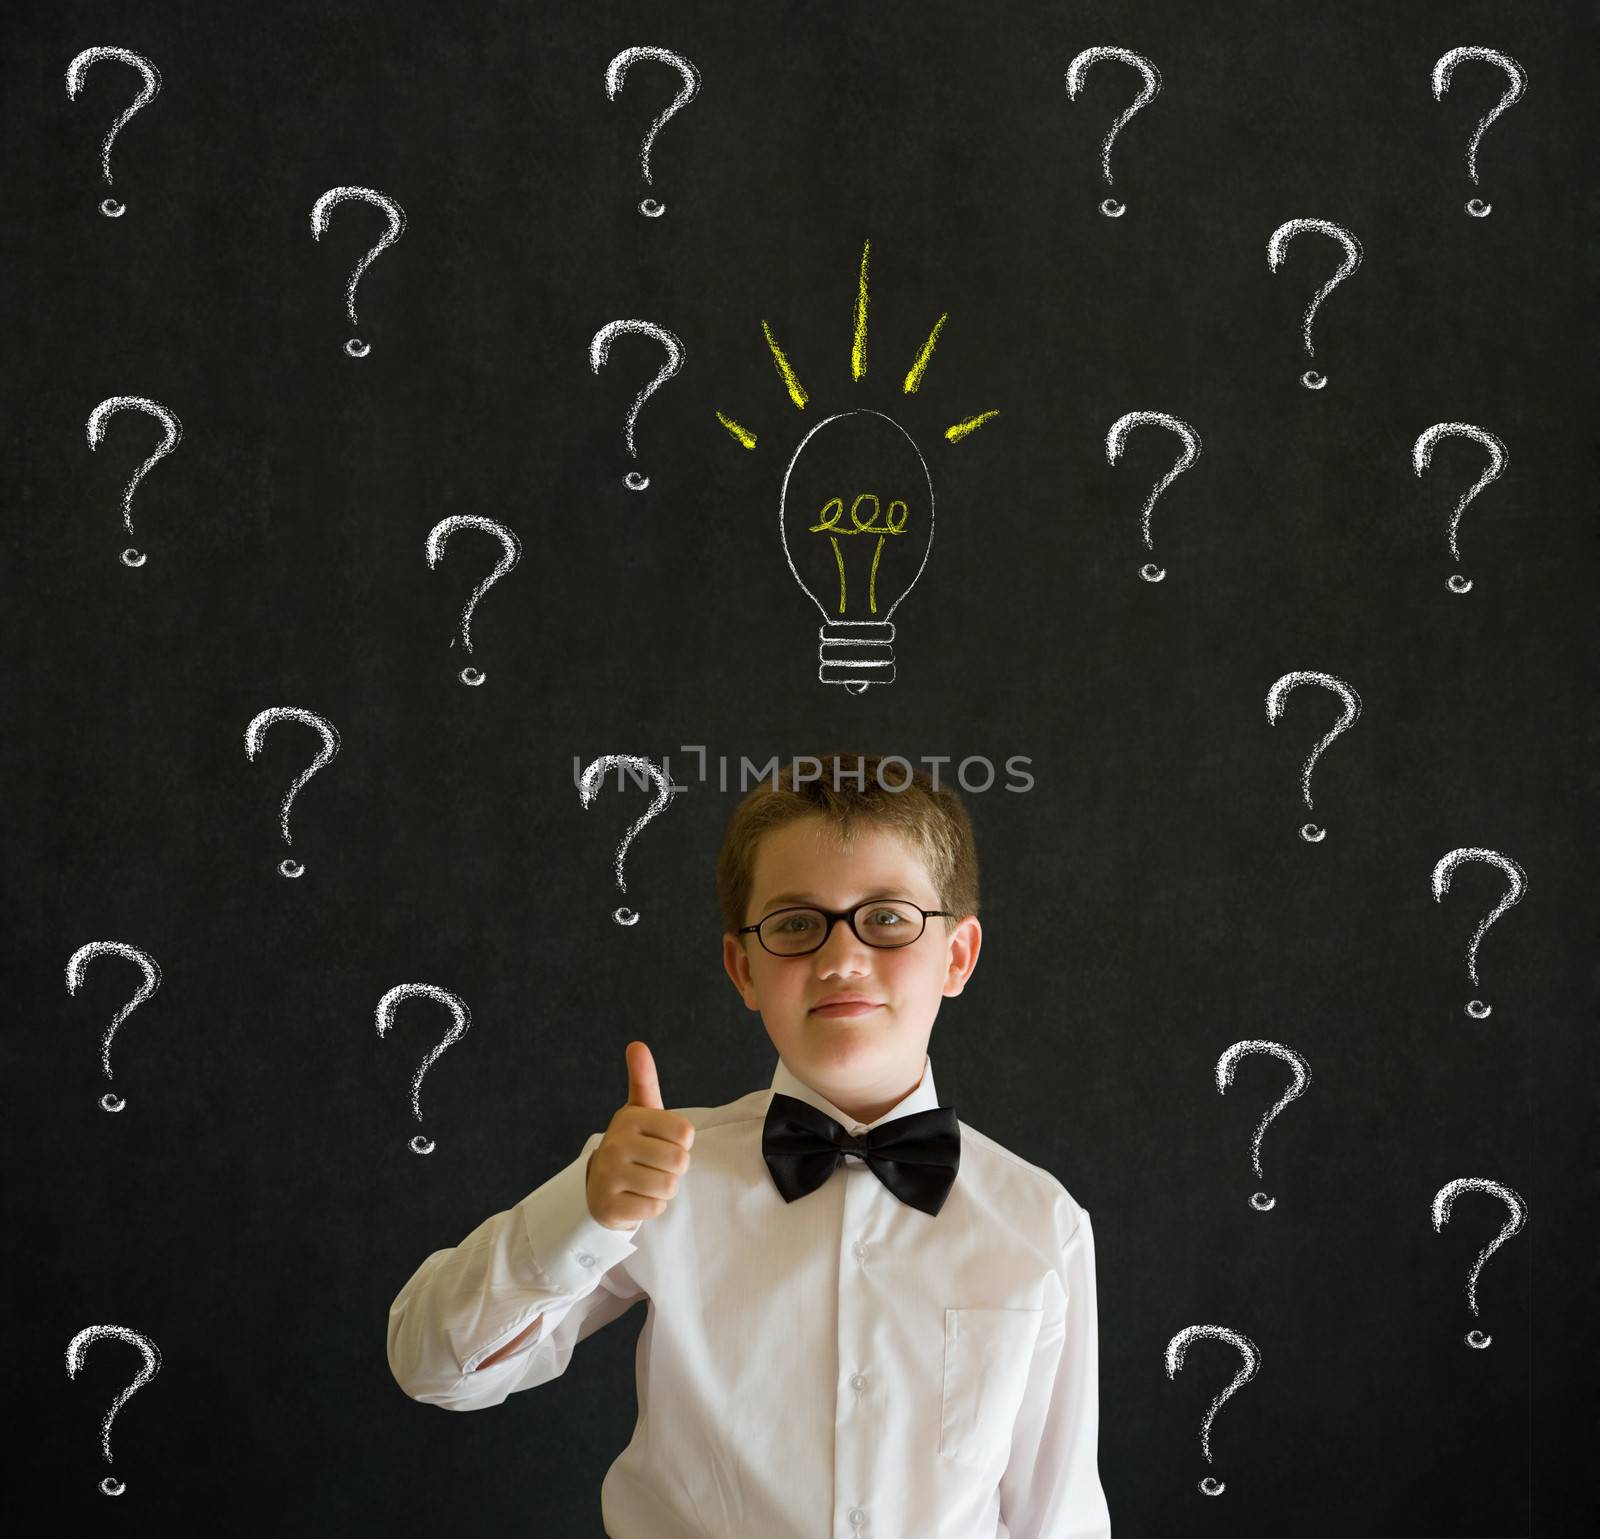 Thumbs up boy dressed up as business man questioning ideas by alistaircotton